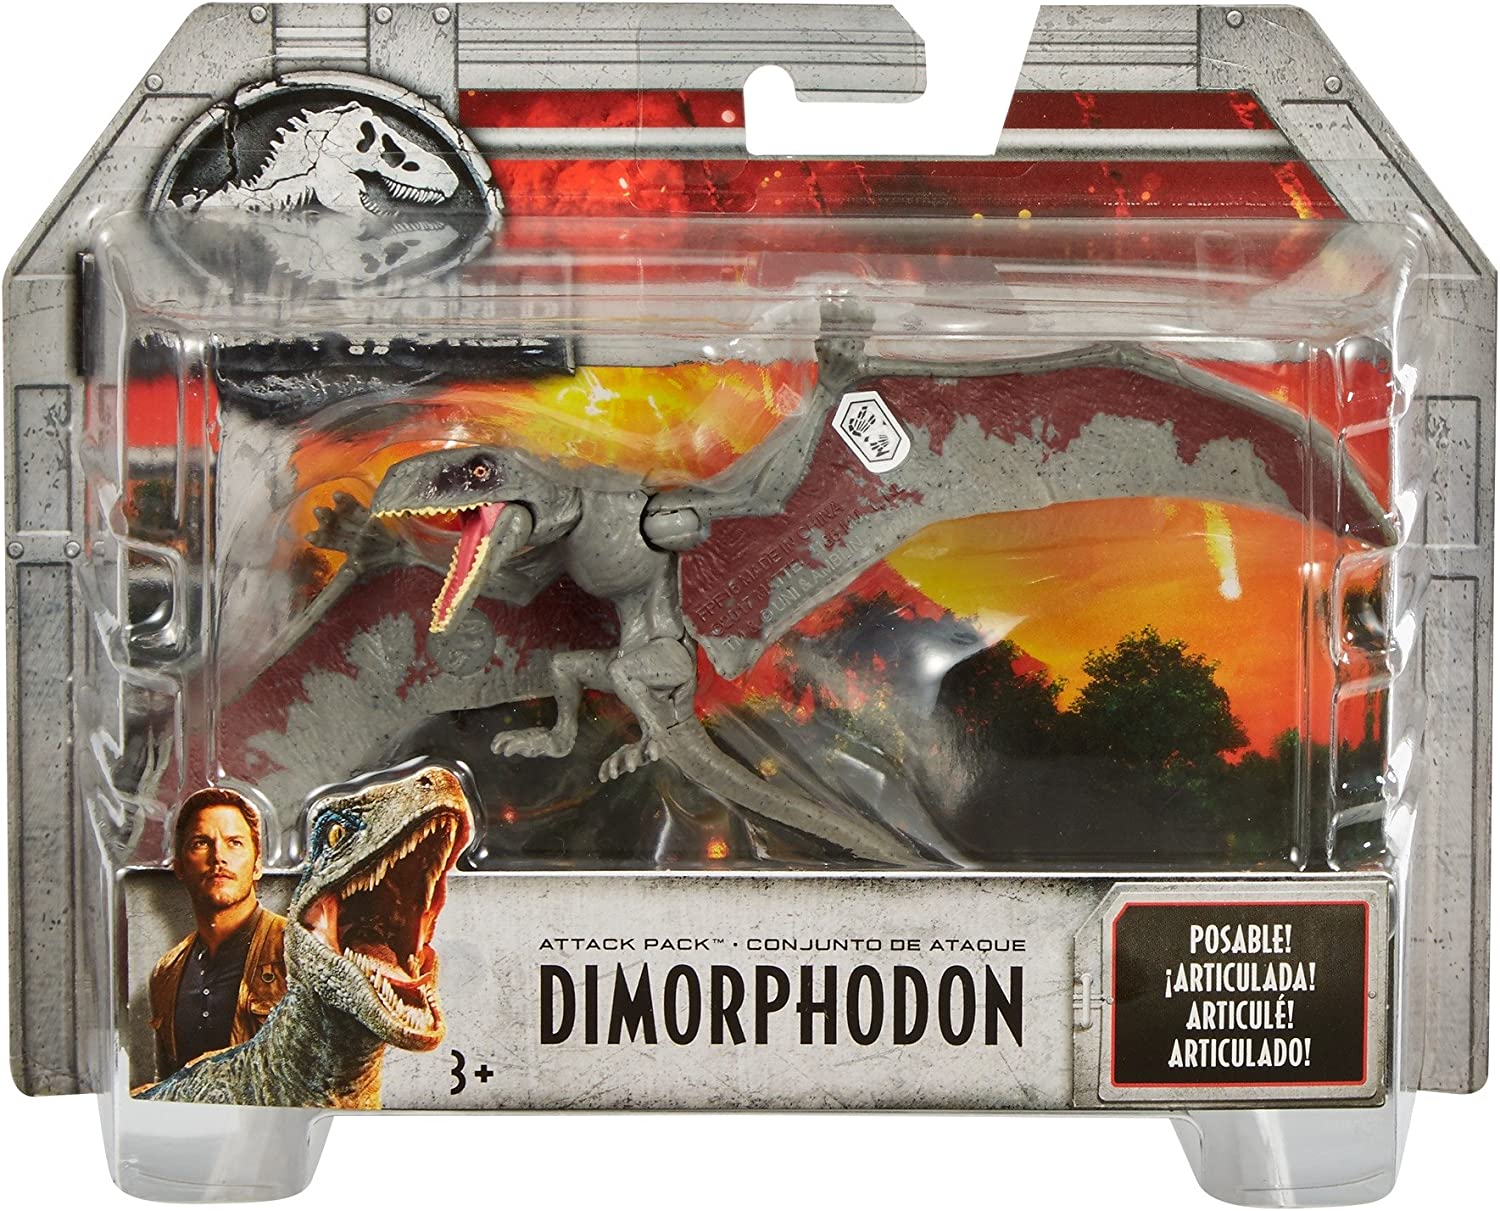 Jurassic World - dinosaur attack pack with 5 motion points